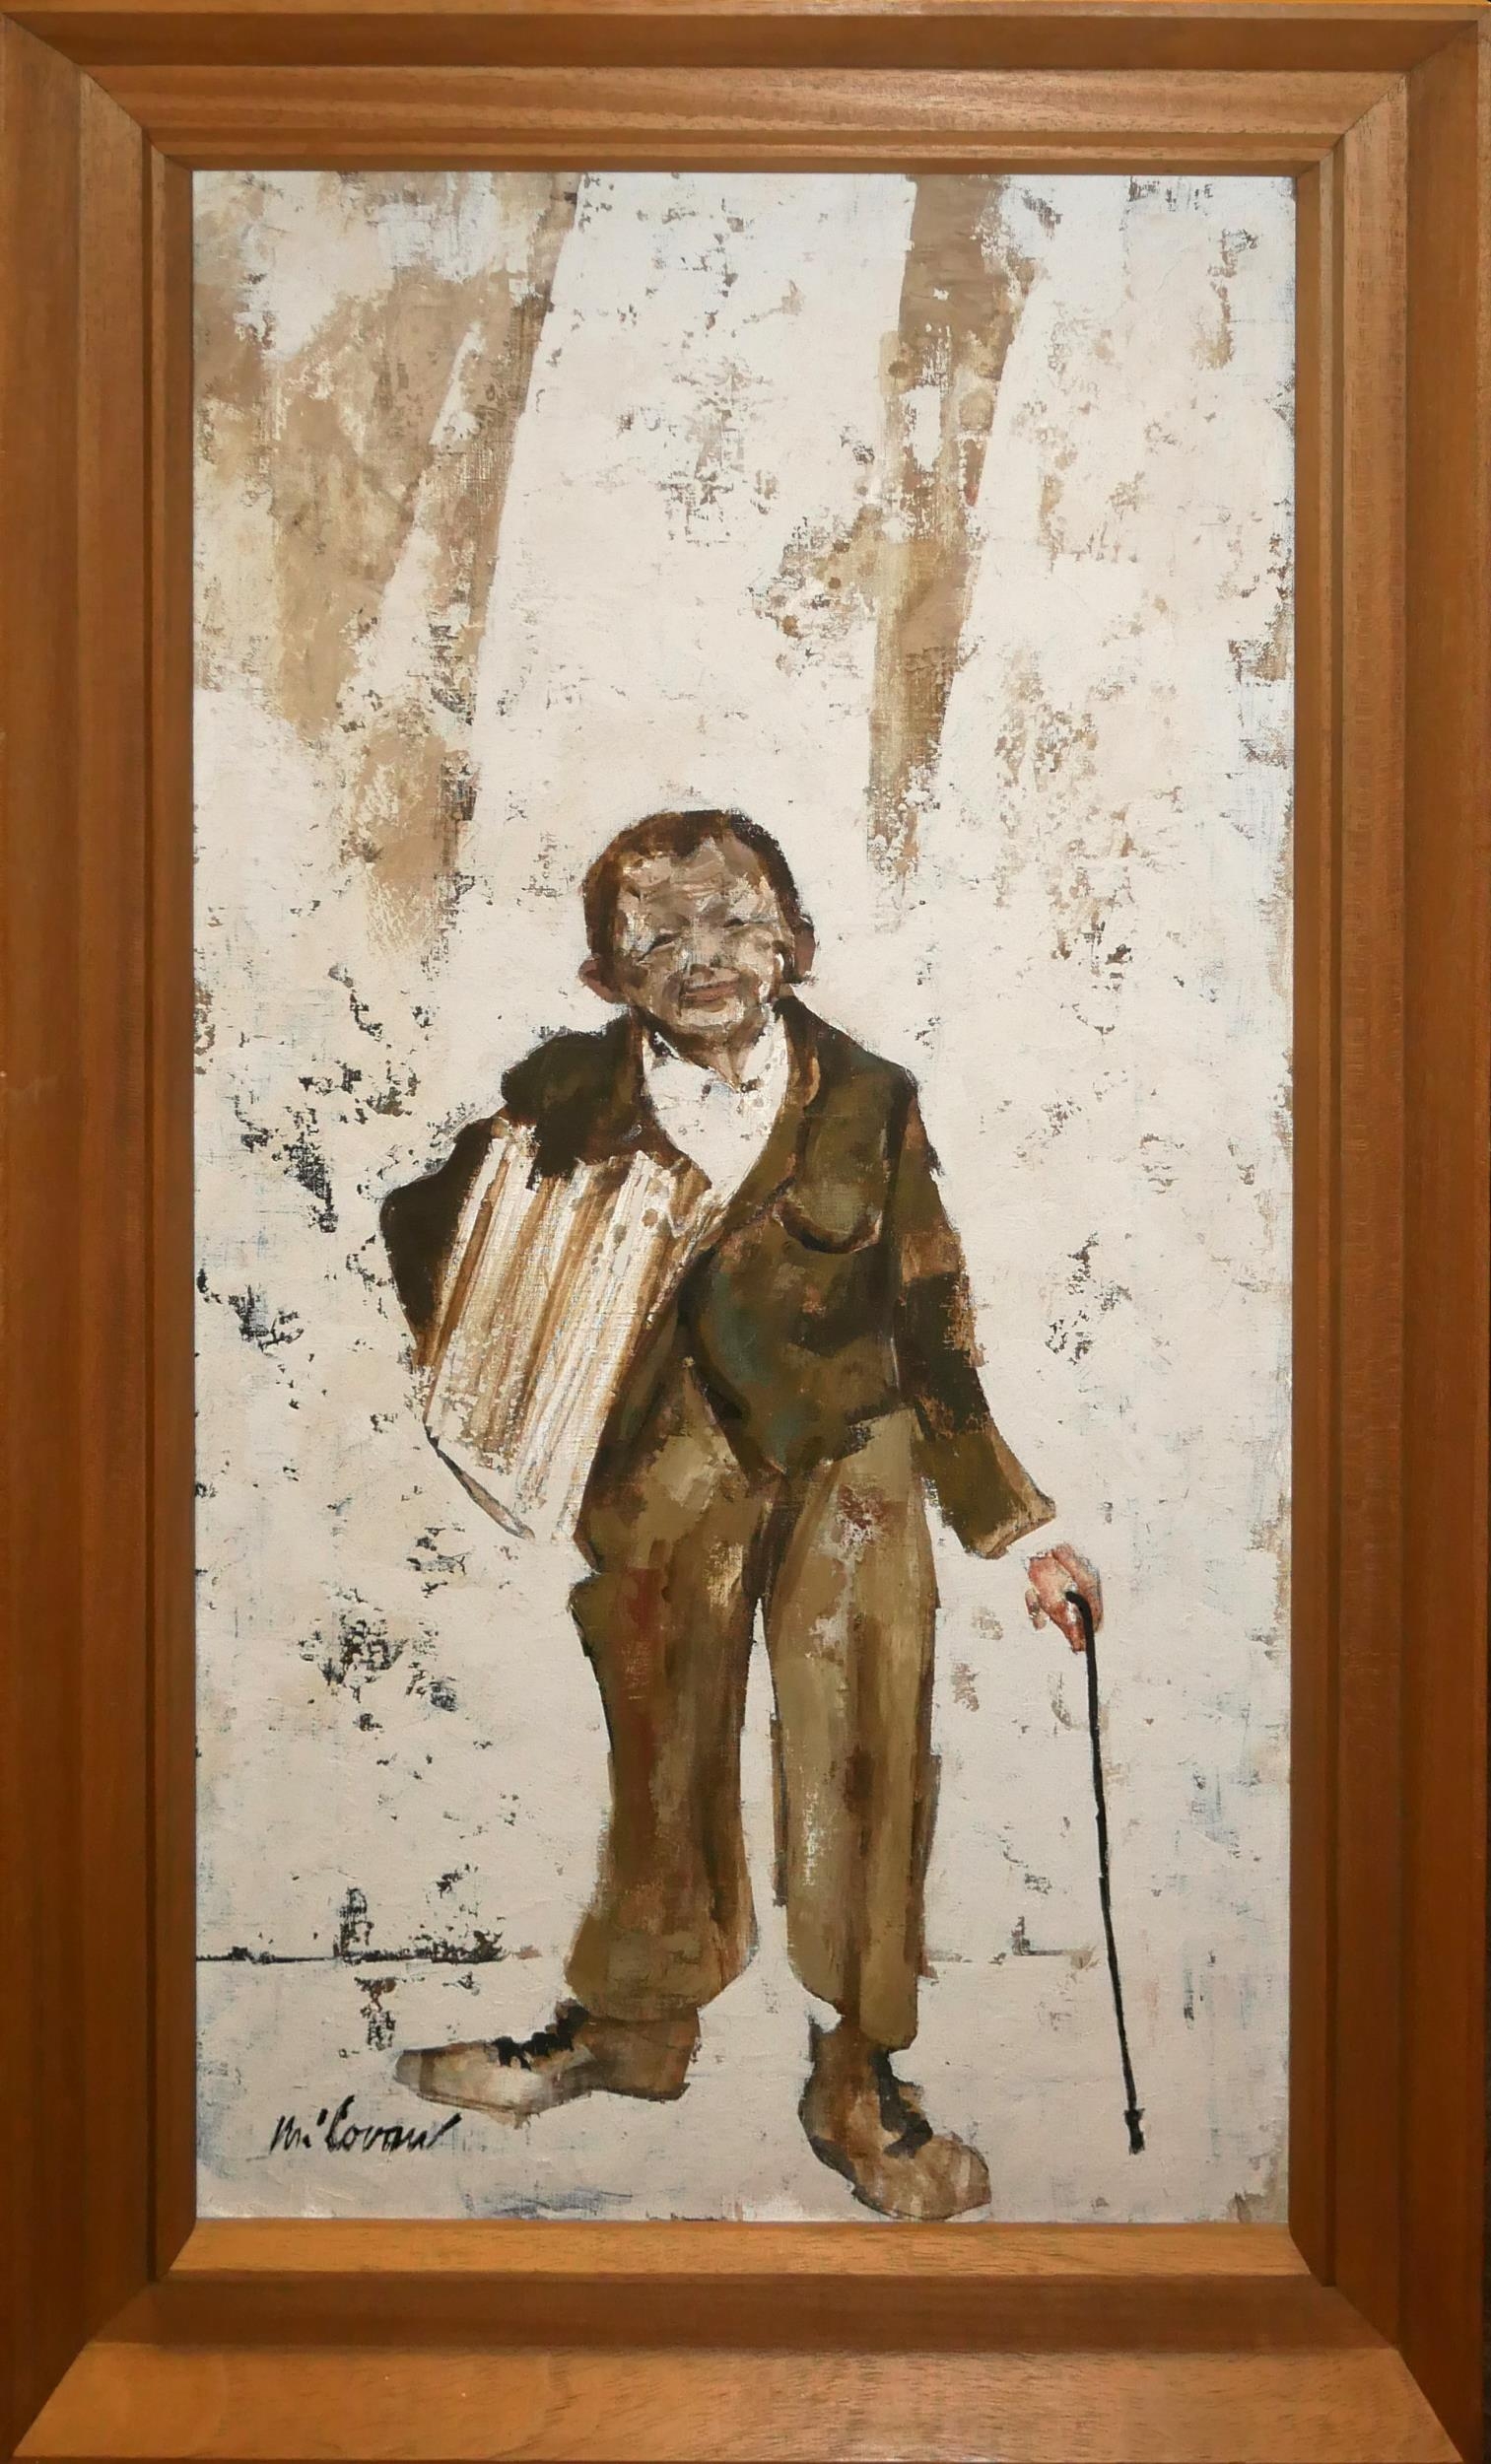 MILOVAN STANCI?, CROATIAN, 1929 - 1989, MIXED MEDIA ON BOARD Portrait of young boy holding cane - Image 3 of 7